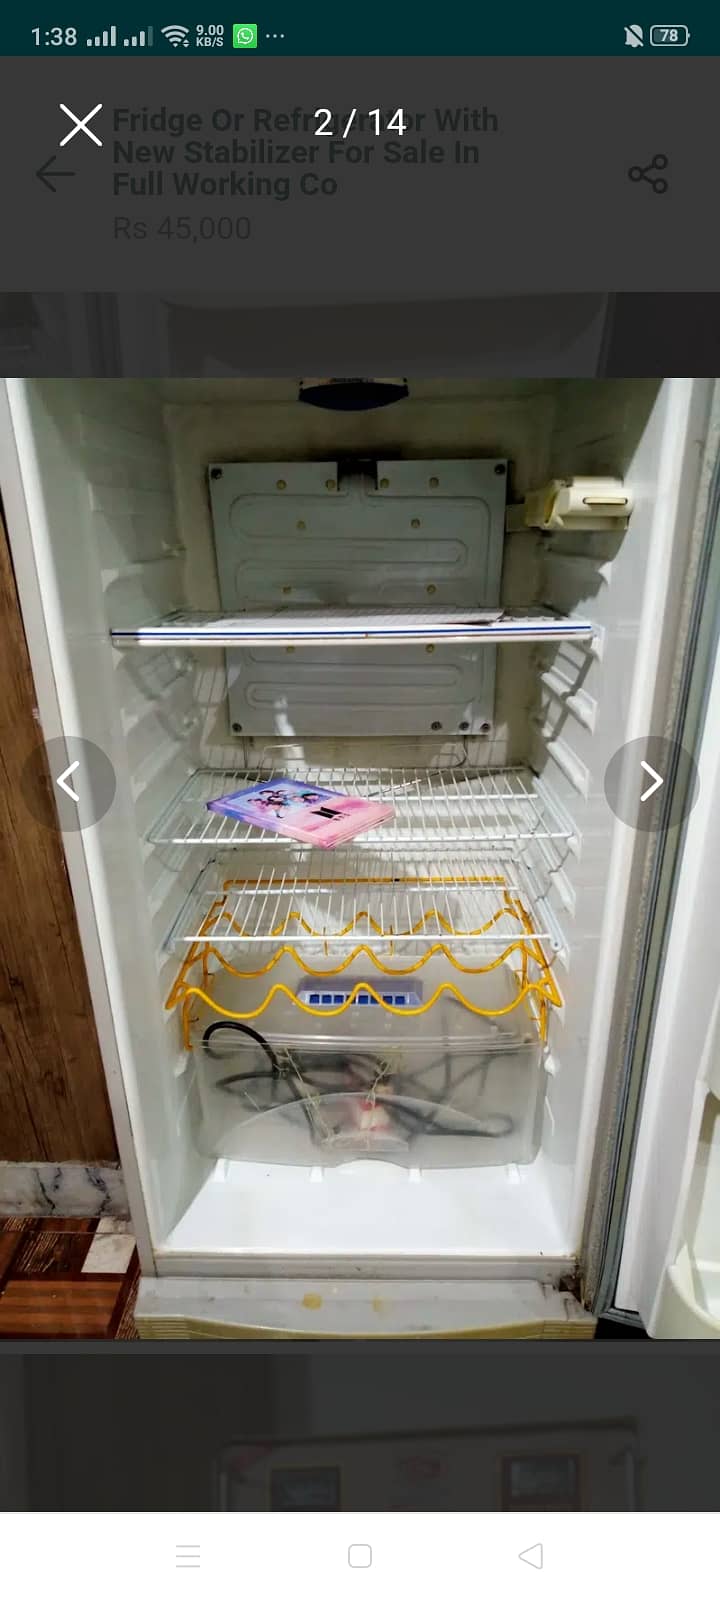 Dawlance refrigerator /fridge for in very good condition. 1